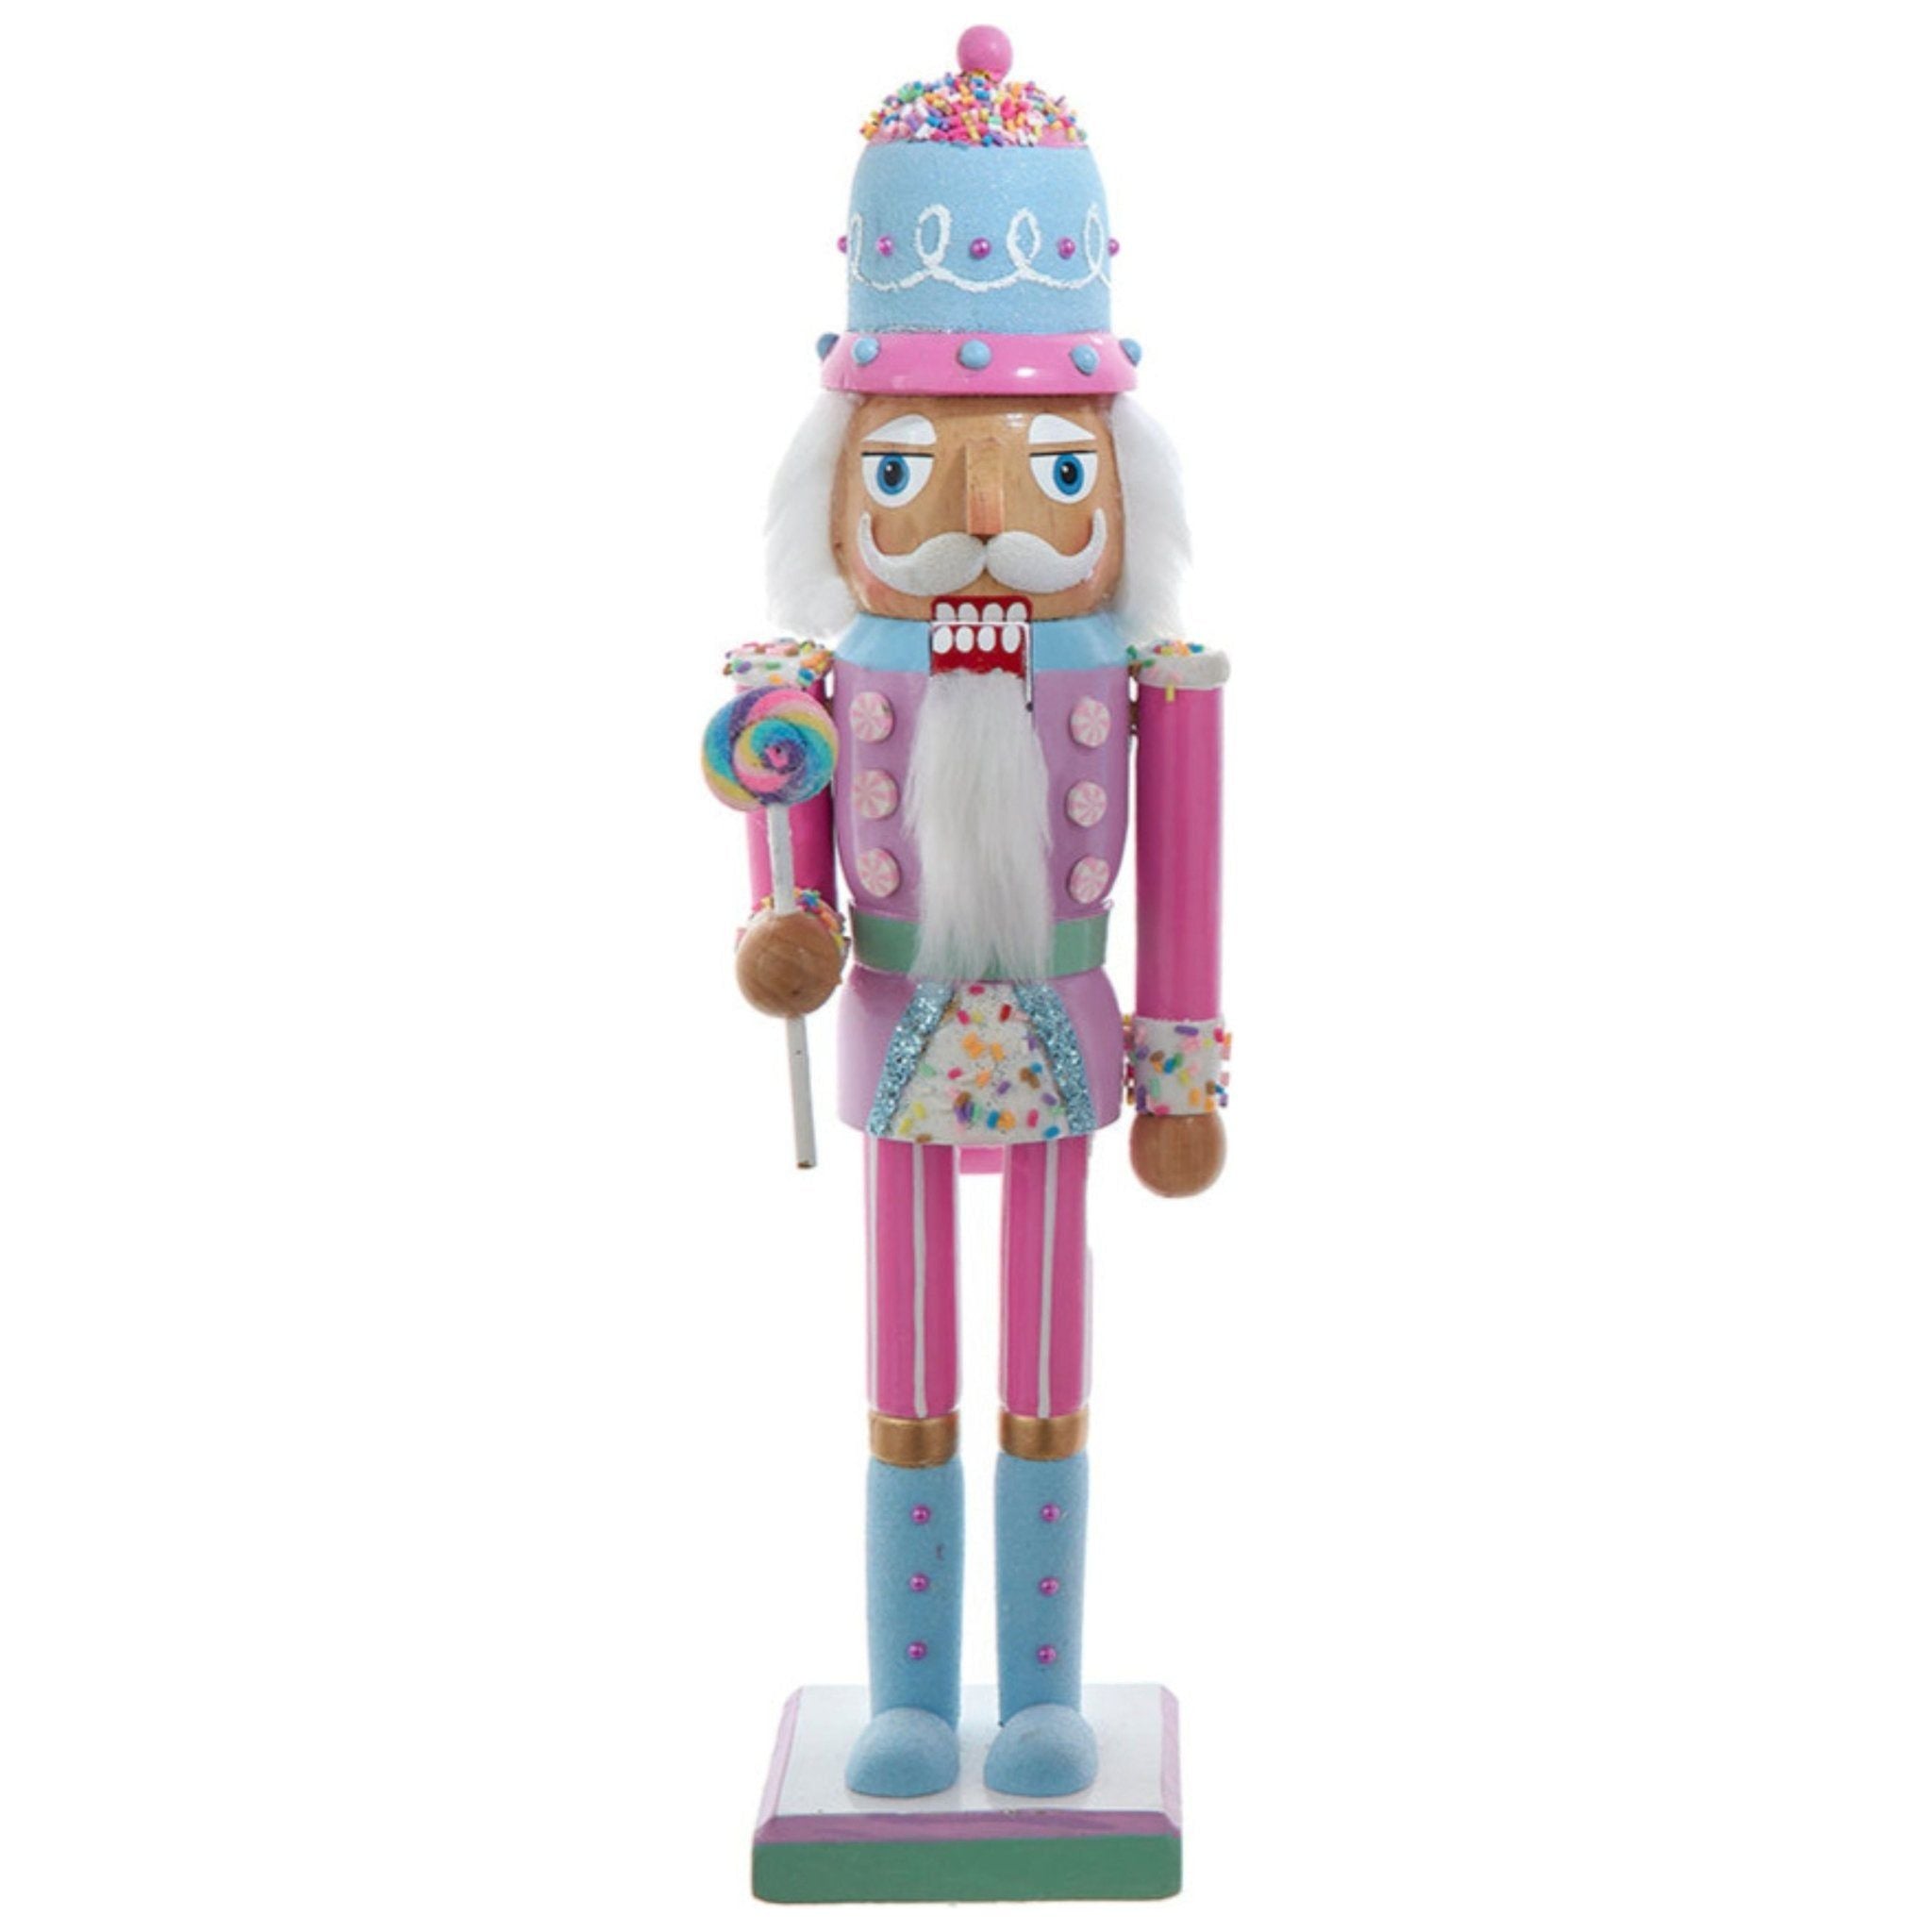 Shop For 15" Wooden Candy Color Nutcrackers F2280